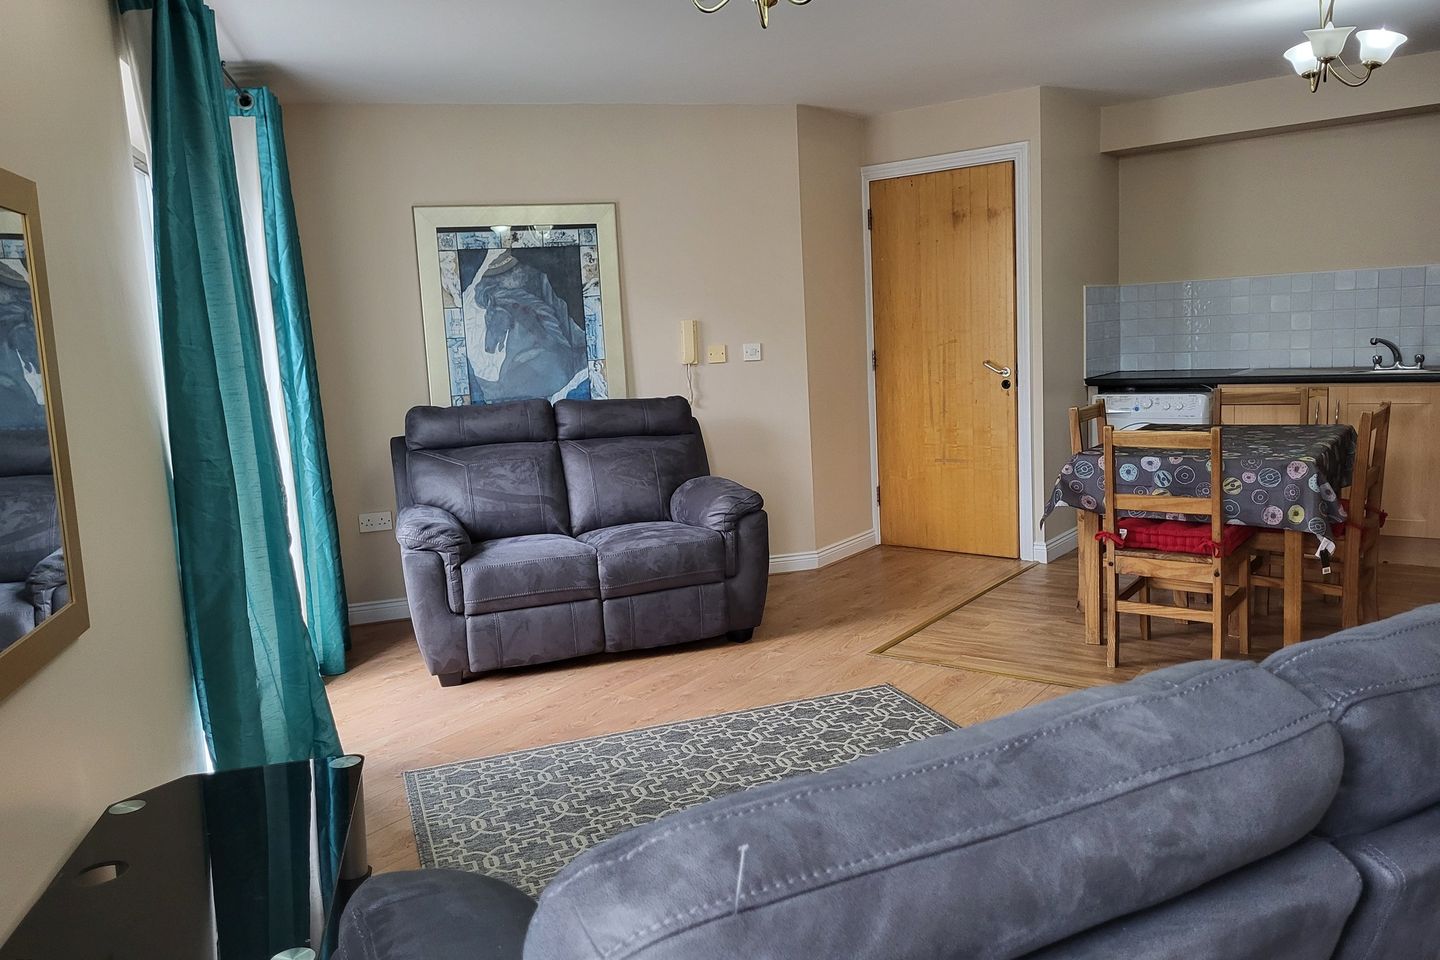 Apartment 1, Osman House, Waterford City, Co. Waterford, X91PC79